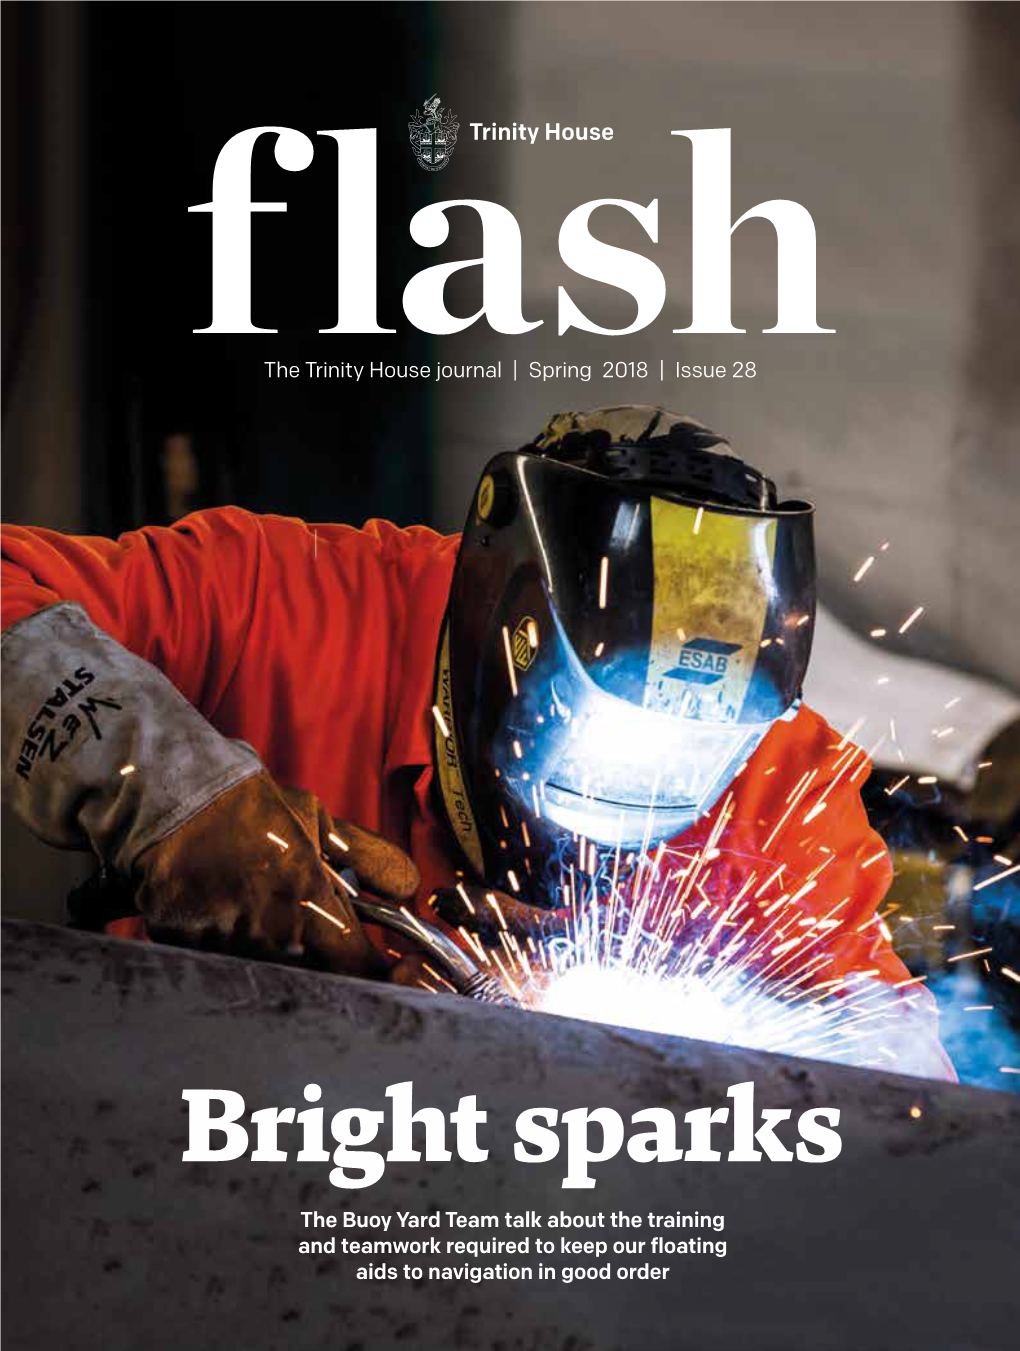 Bright Sparks the Buoy Yard Team Talk About the Training and Teamwork Required to Keep Our Floating Aids to Navigation in Good Order Spring 2018 | Issue 28